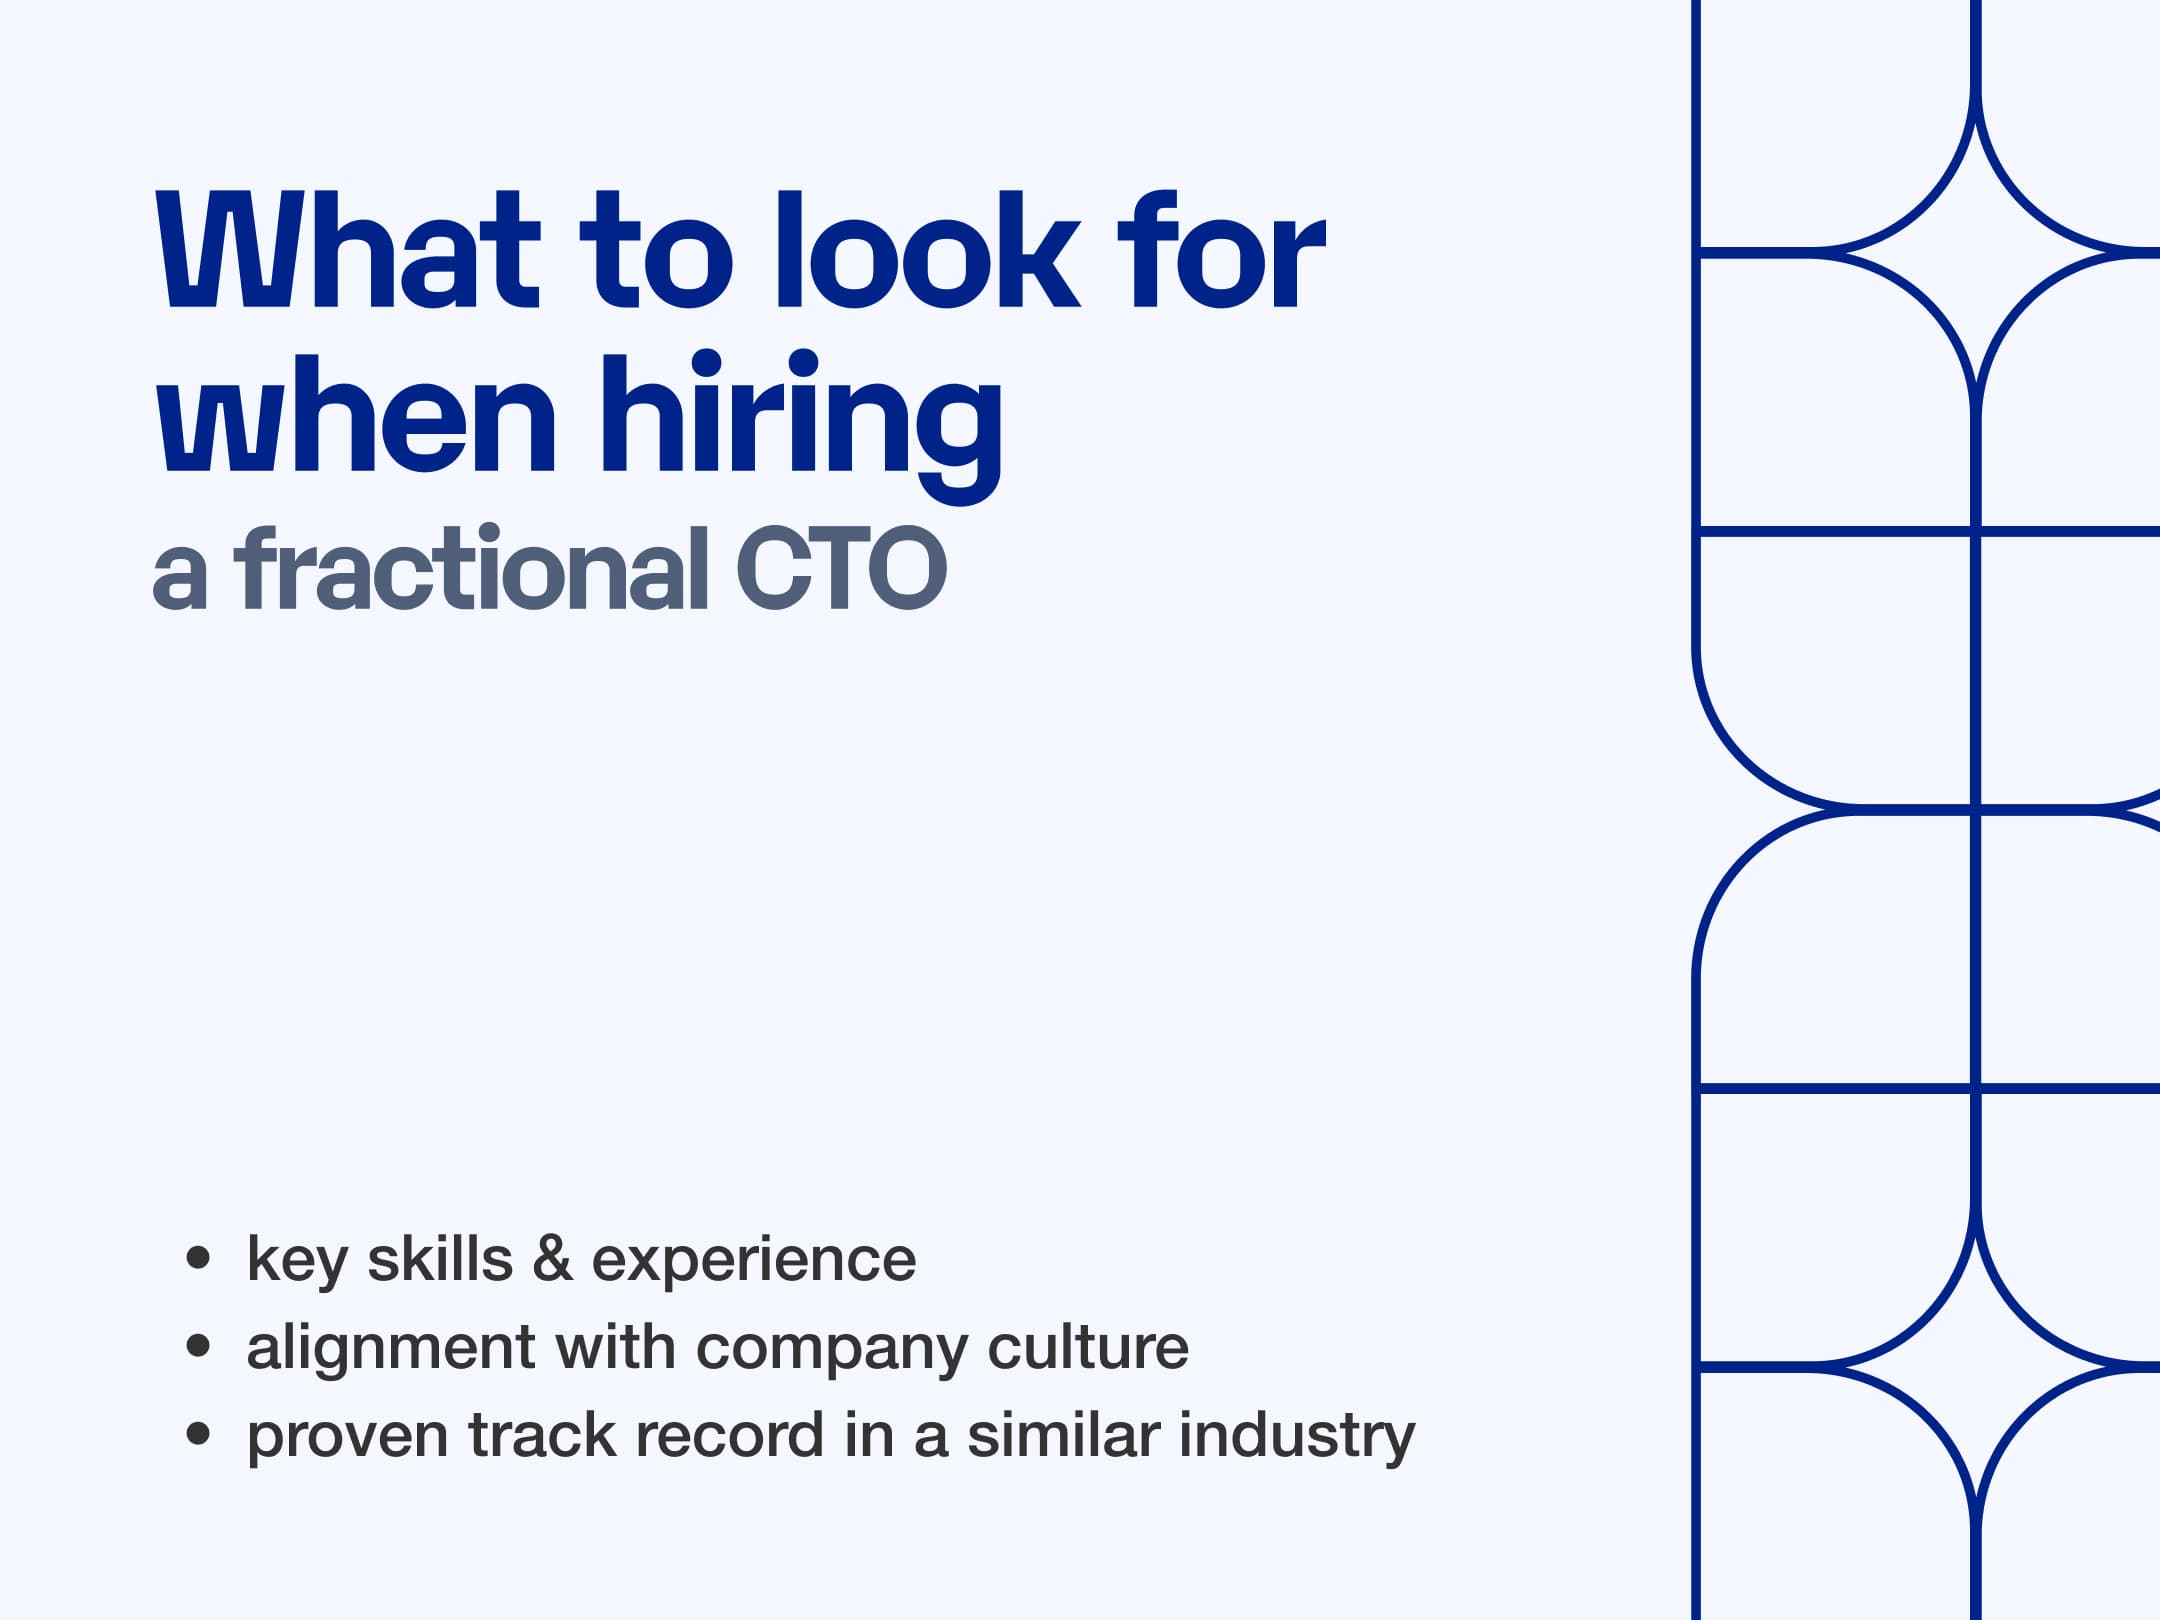 What to Look for When Hiring a Fractional CTO